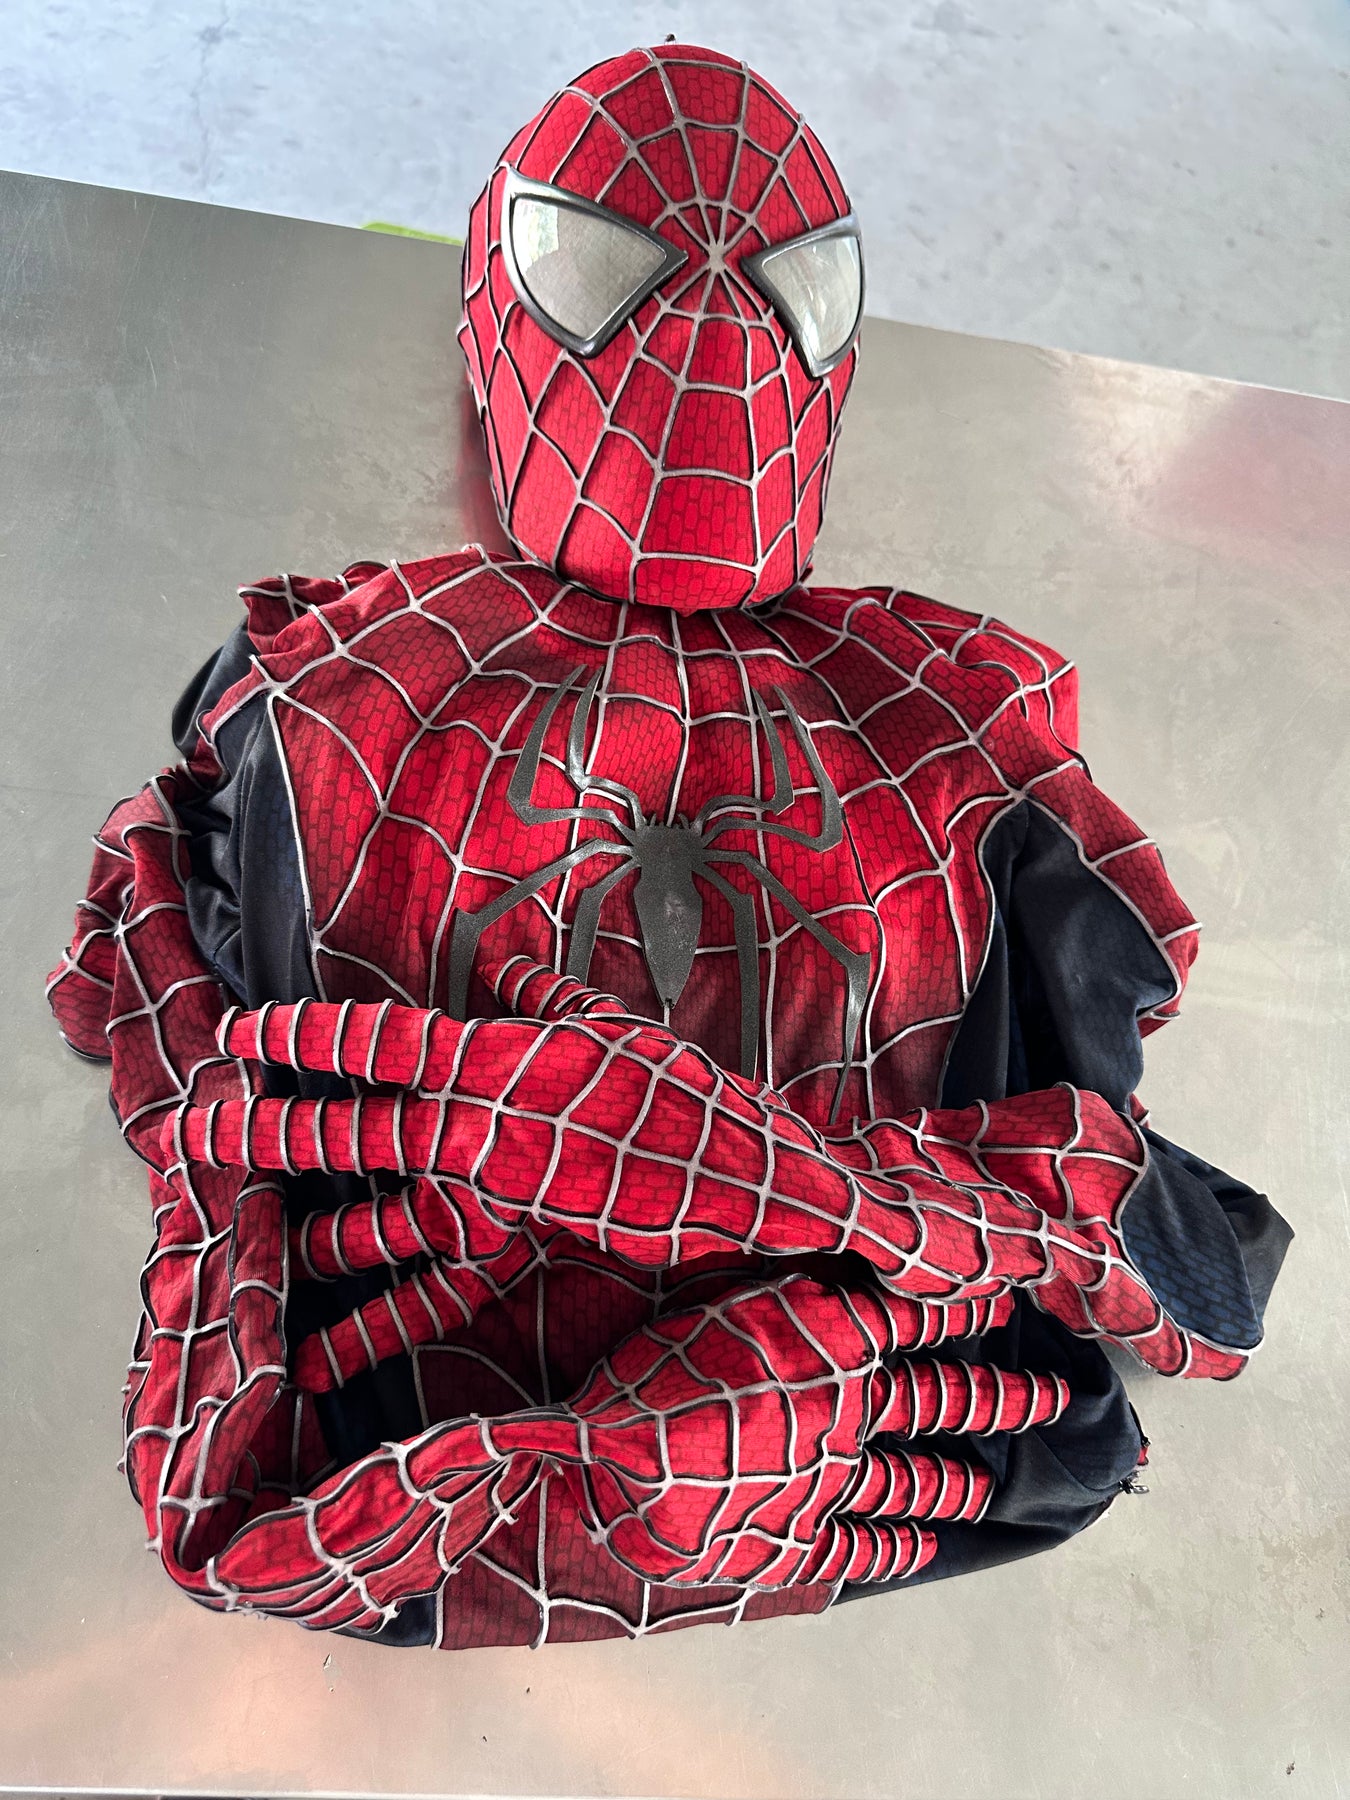 Spiderman Costume Cosplay Sam Raimi Spider Man Suit Adults With Faceshell &  3D Rubber Web, Spider-man Wearable Suit Movie Prop Replica 